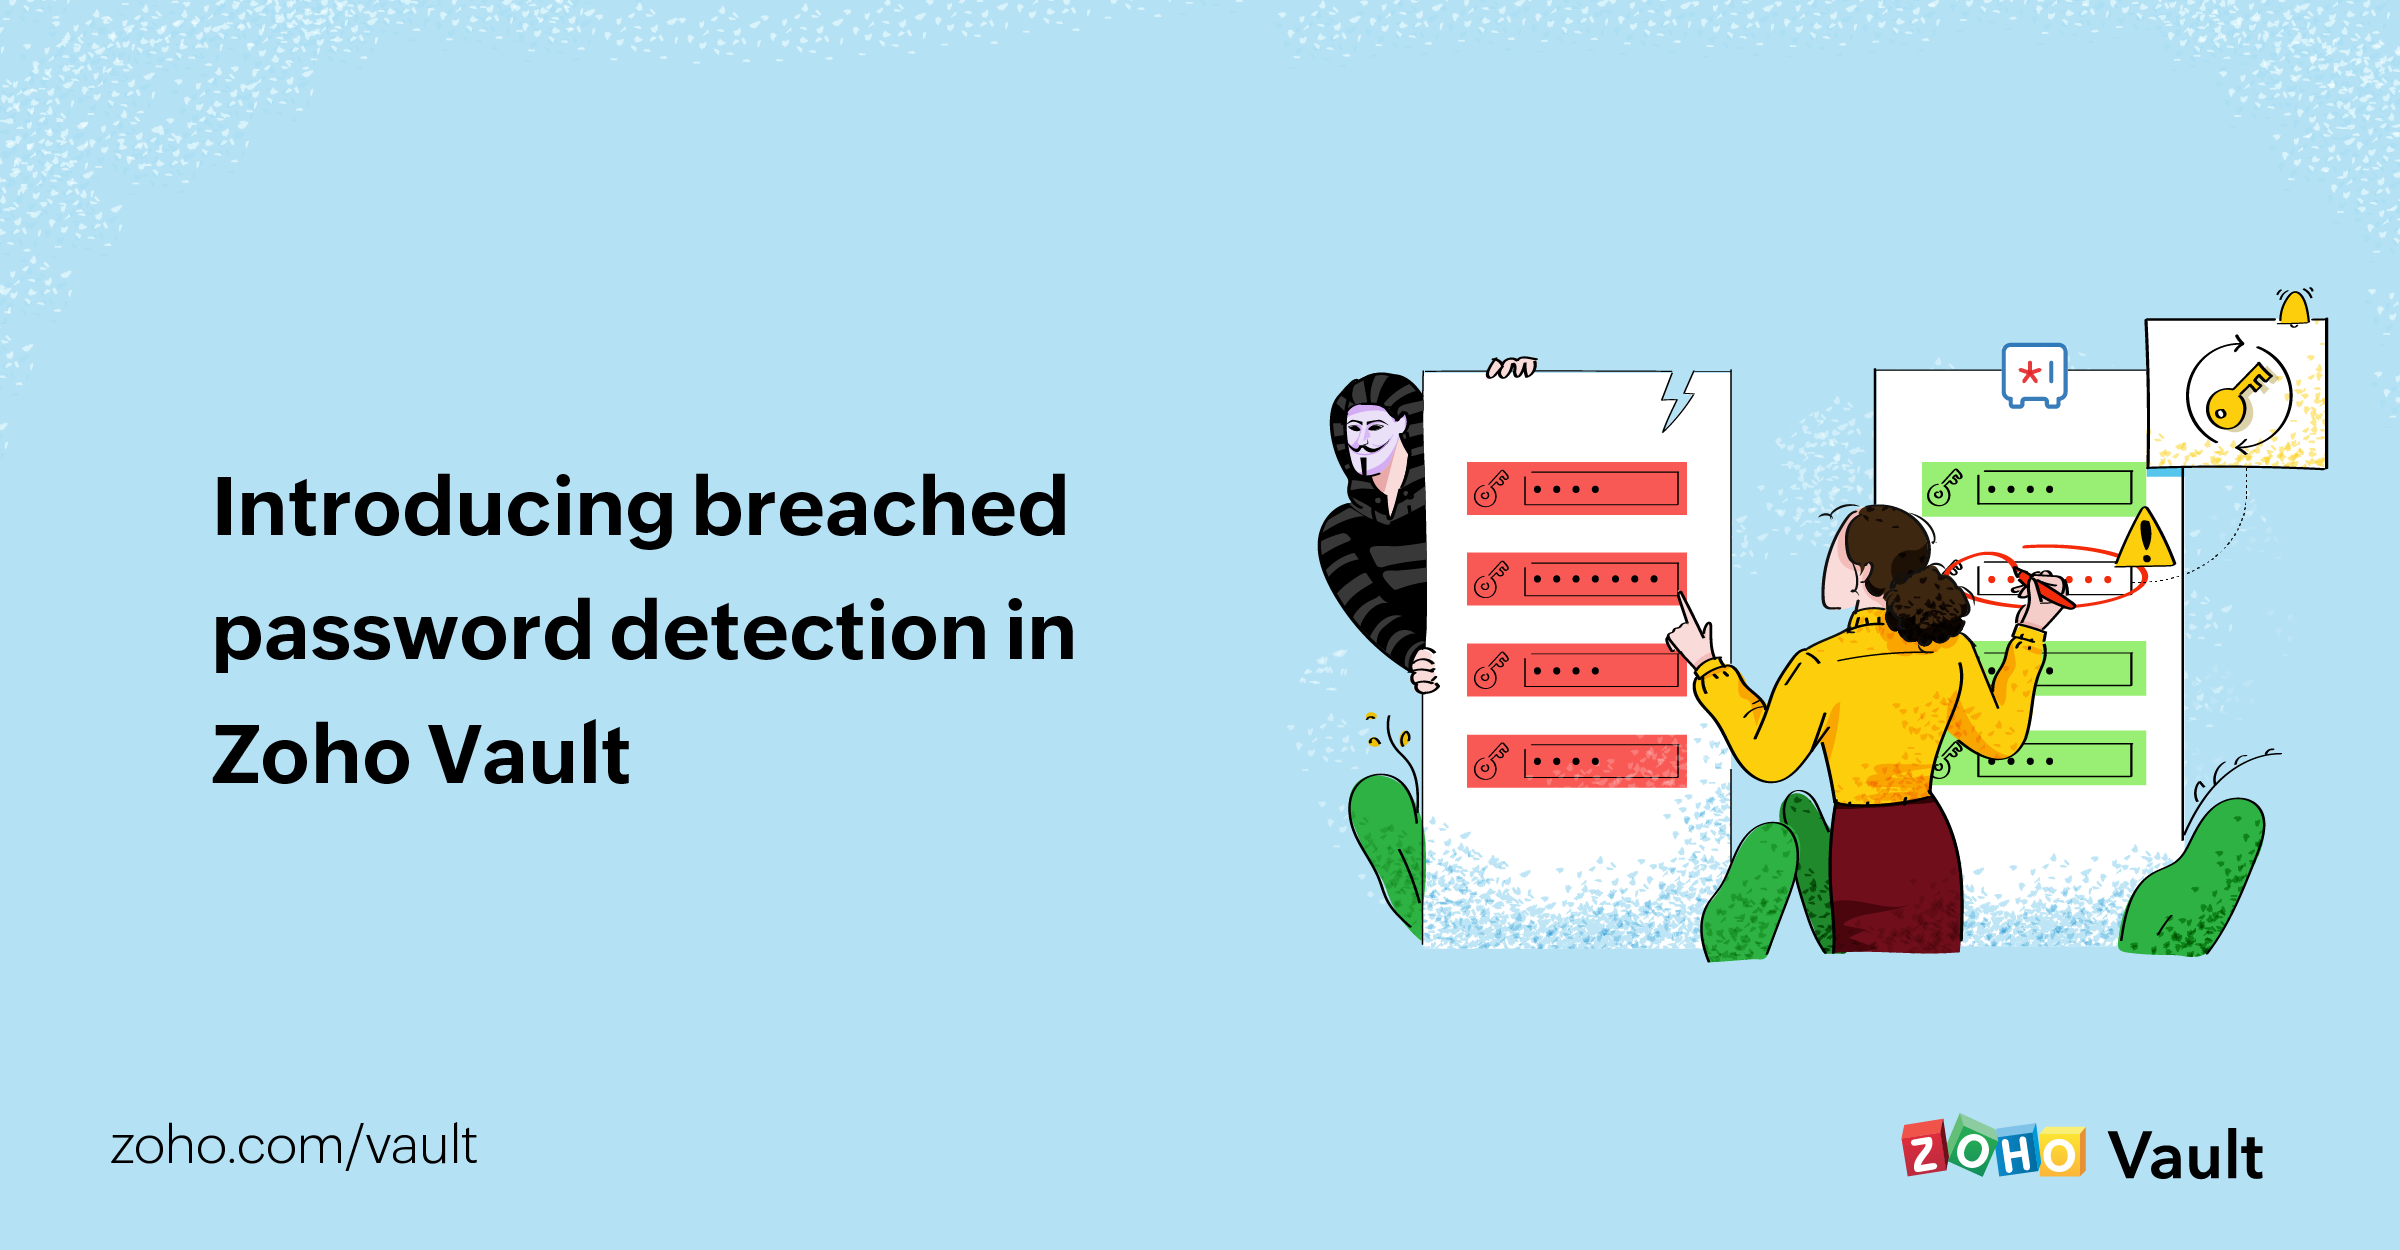 Introducing breached password detection in Zoho Vault